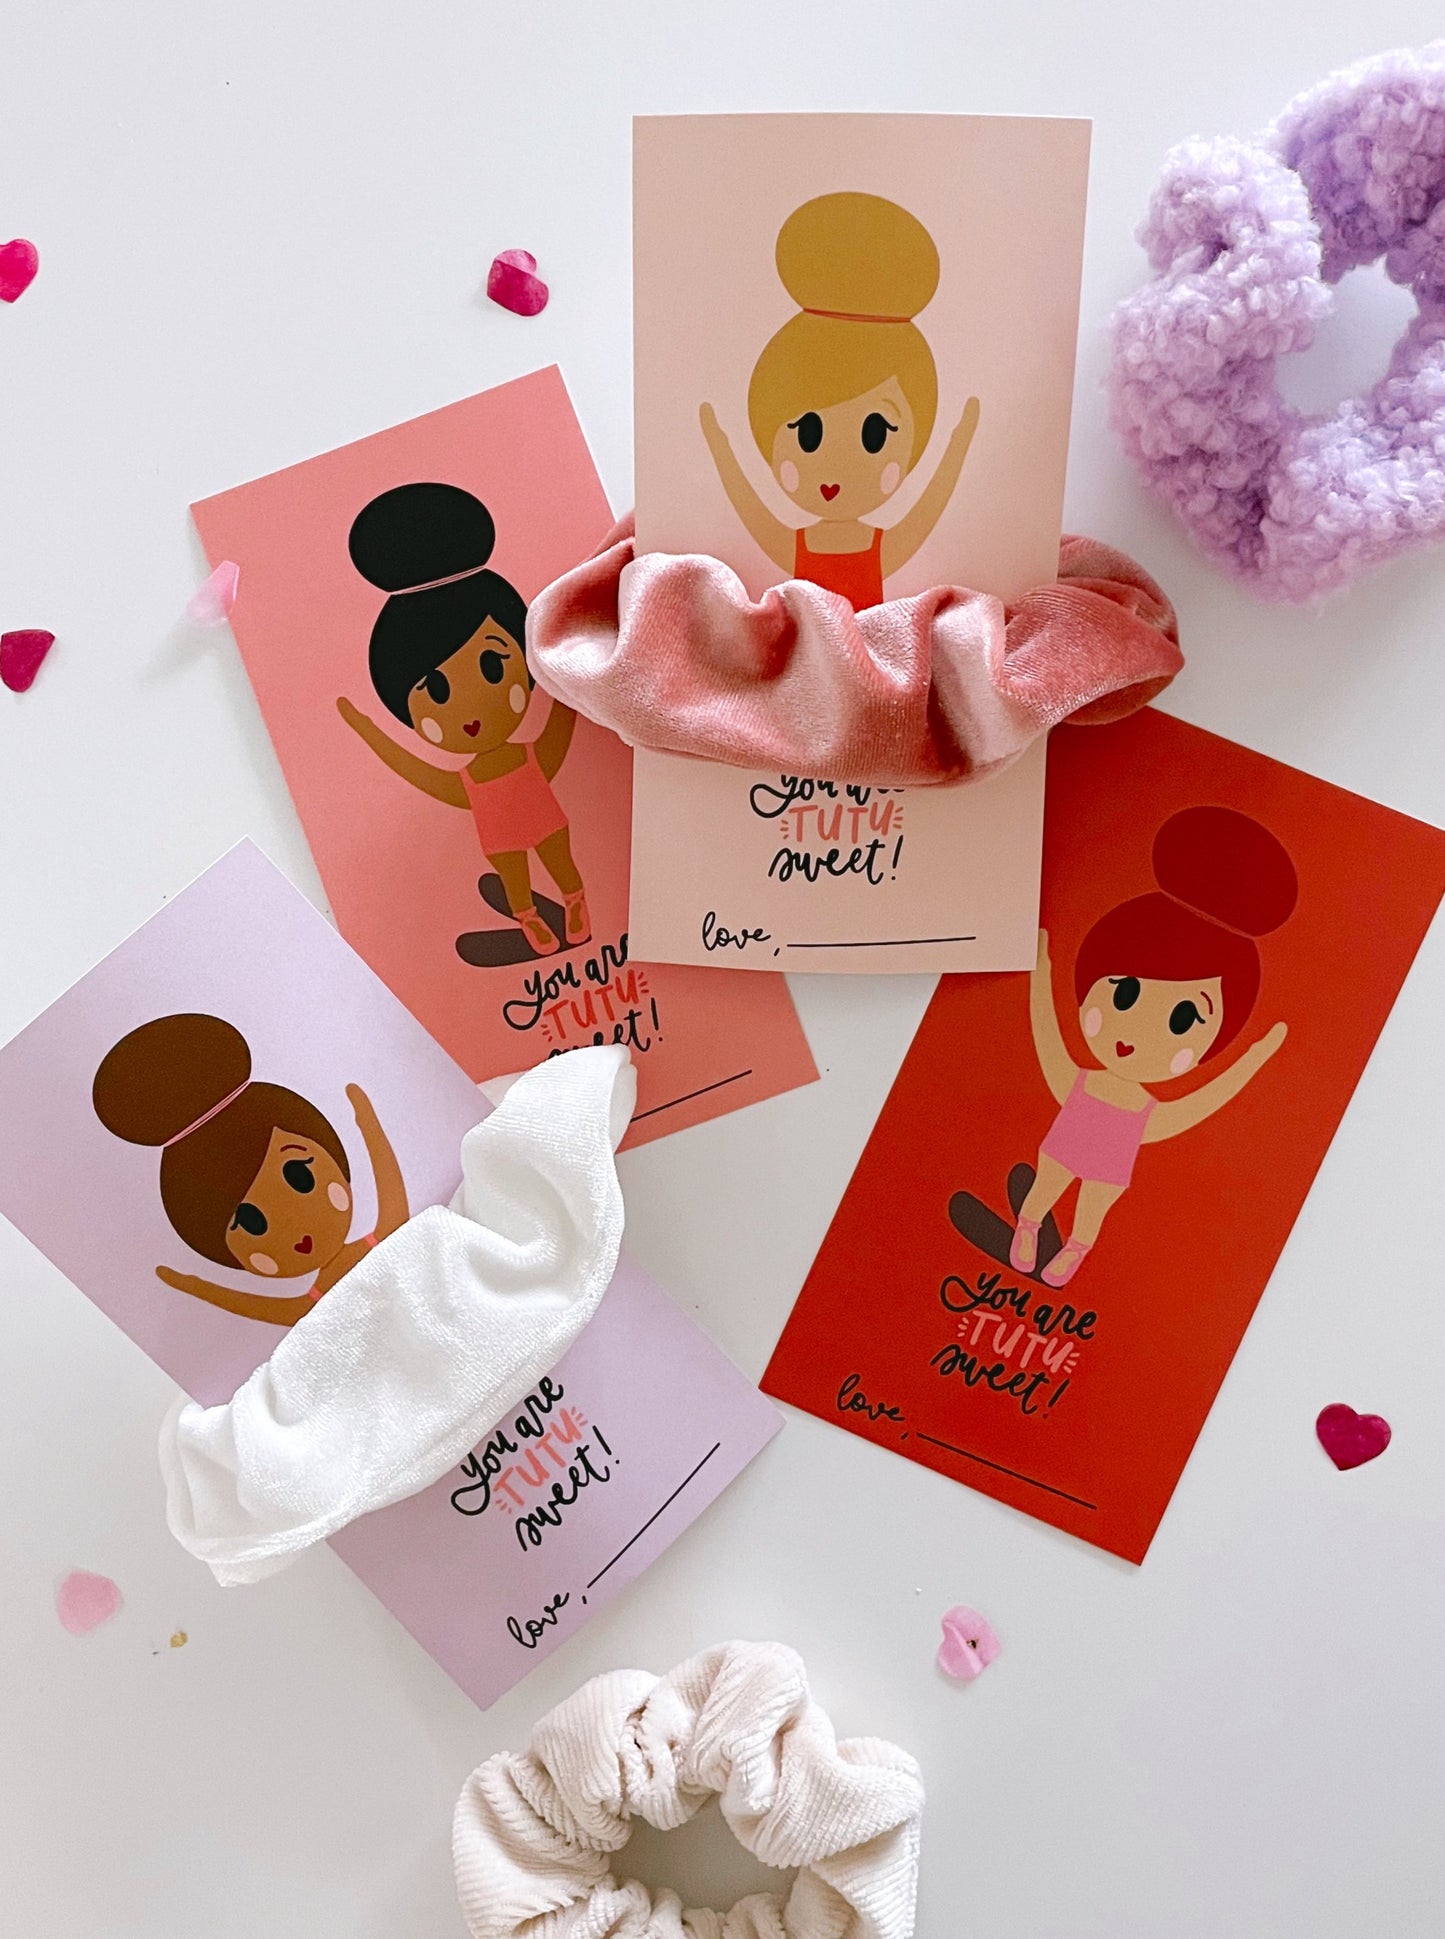 You are TUTU sweet | Printable Valentines